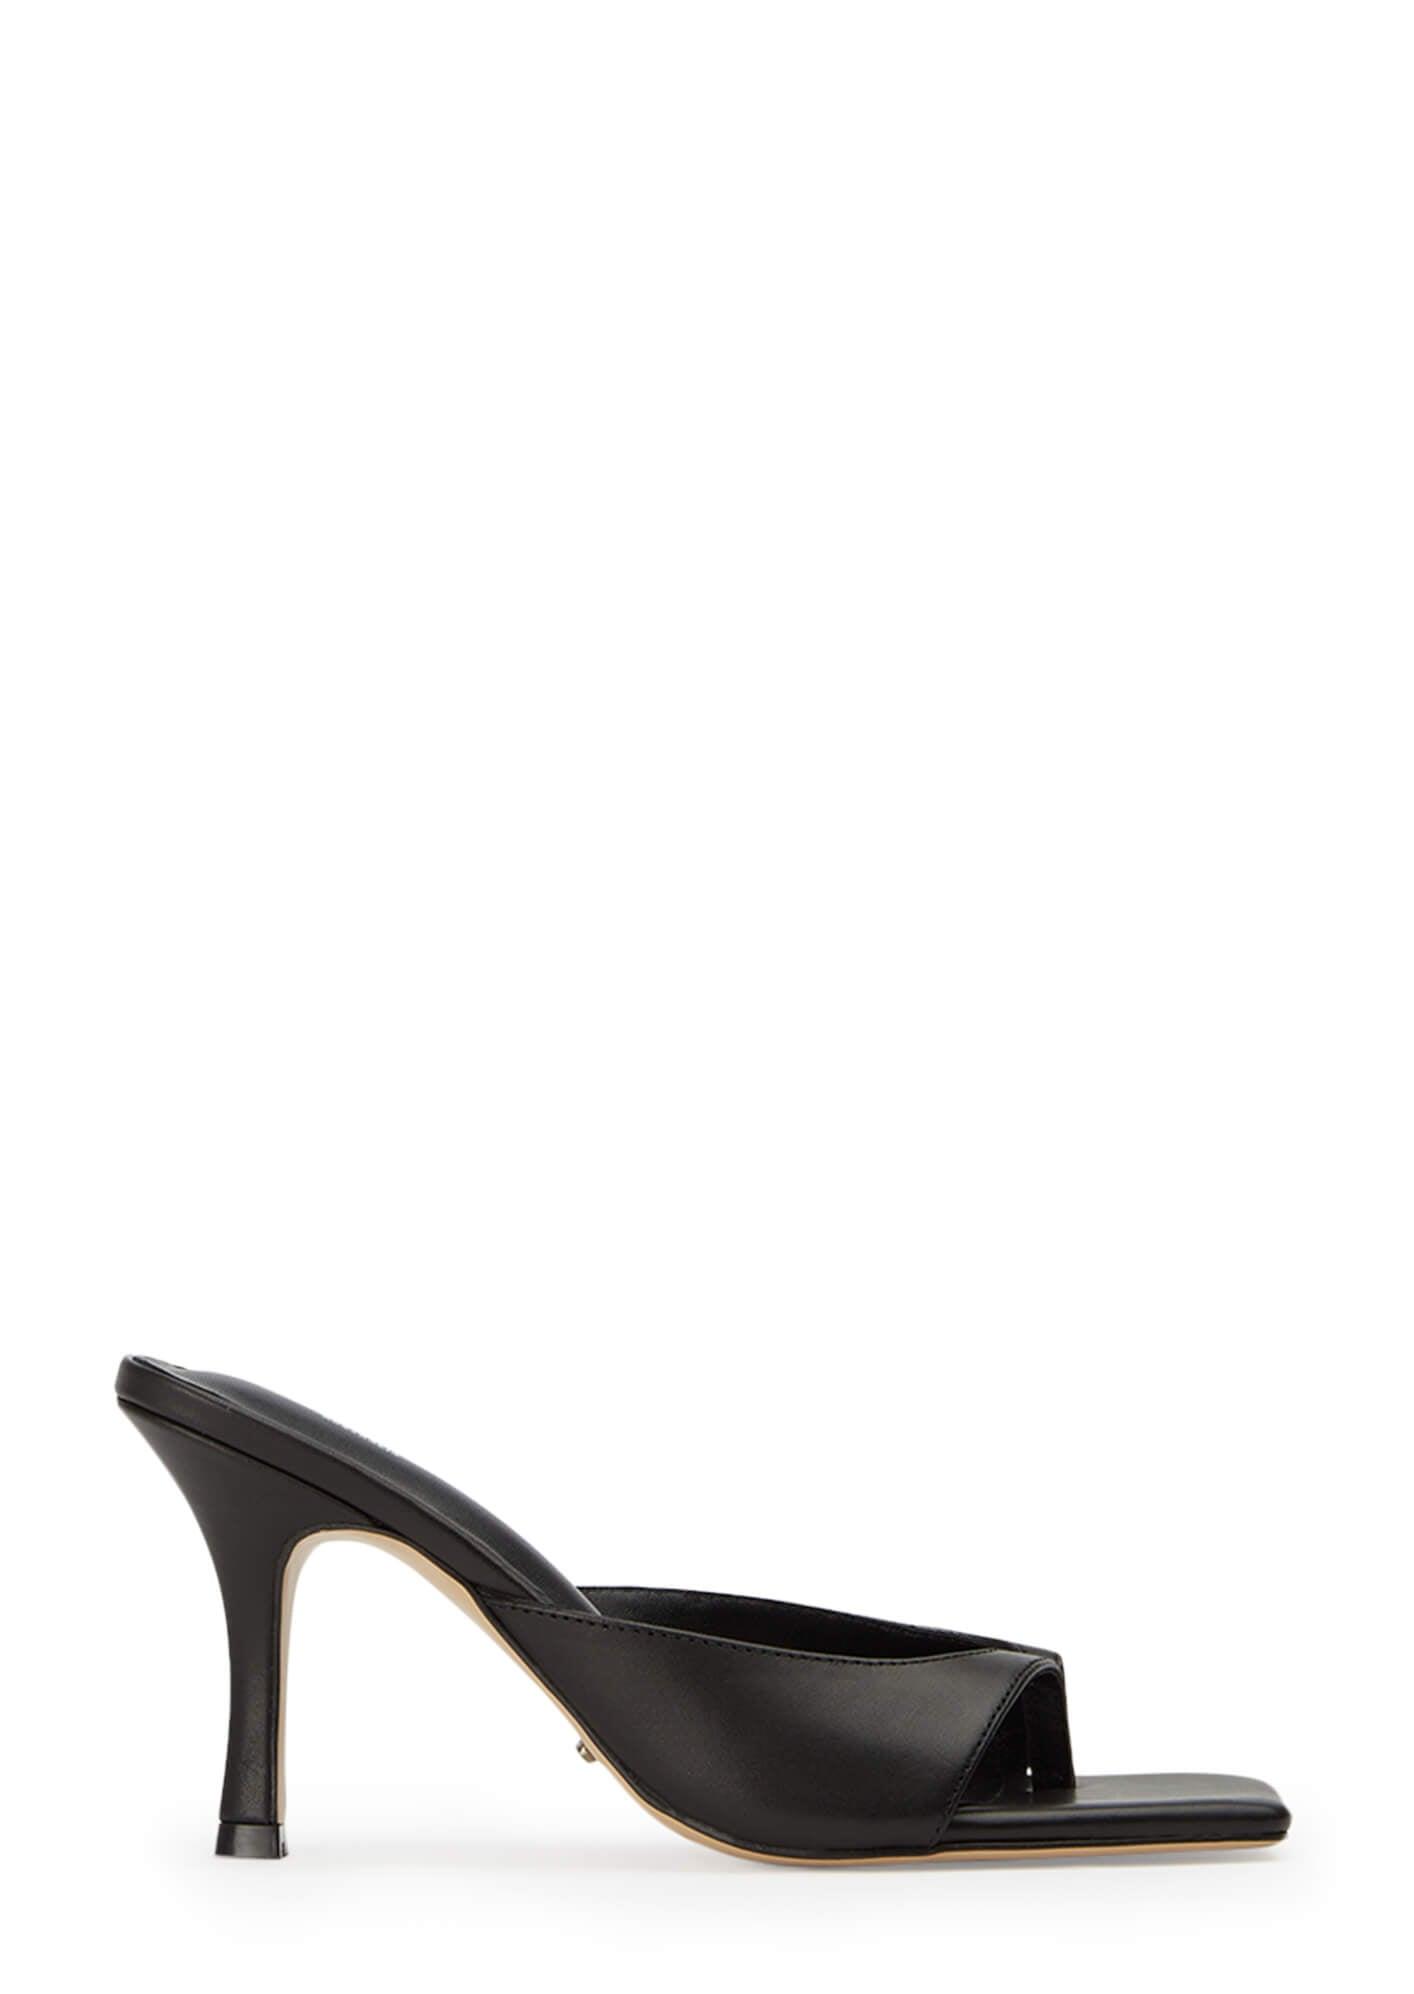 Tony Bianco Leather Crystle 8.5cm Heels in Black | Lyst